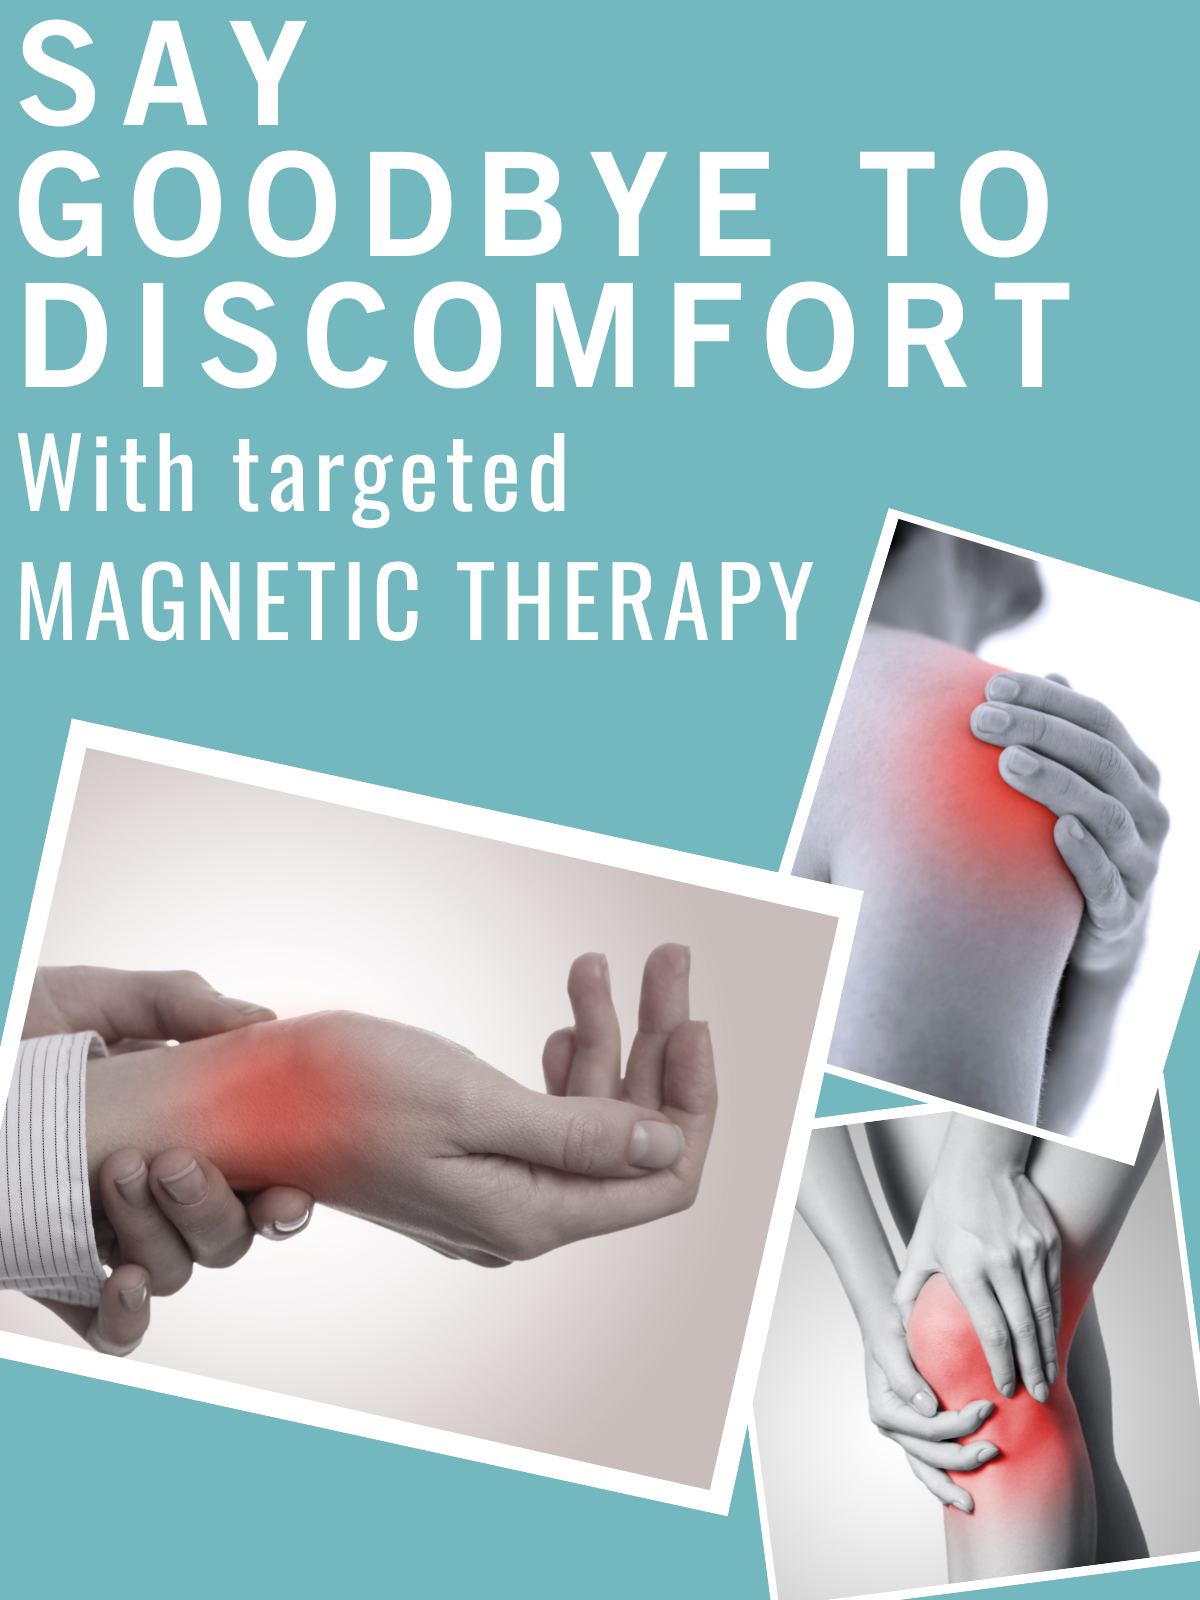 magnetic therapy for wrist pain relief